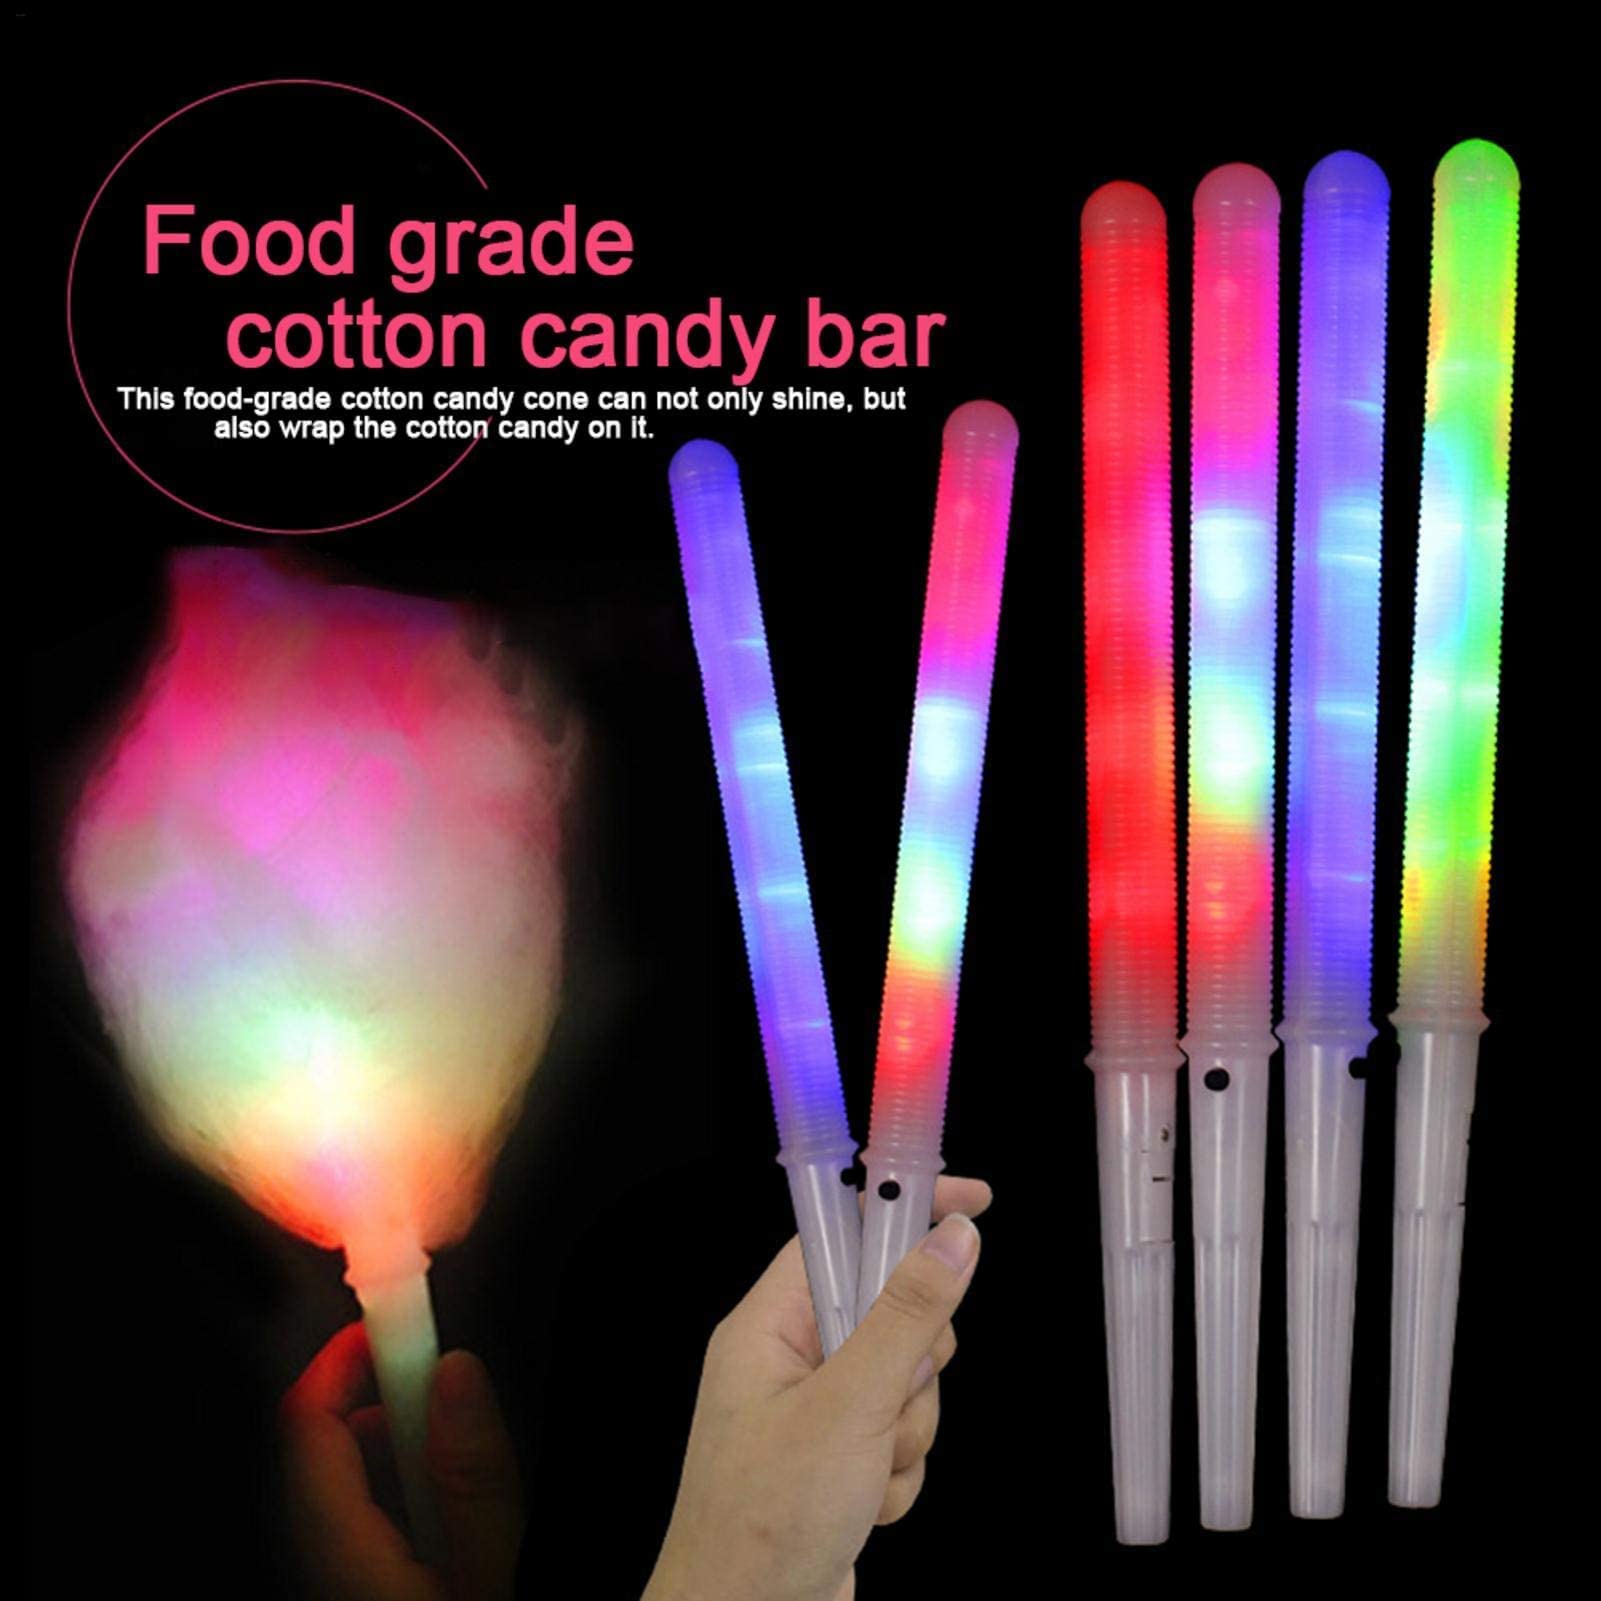 10 Pcs Cotton Candy Cones - Light Up Cotton Candy Sticks, 8 Patterns Colorful LED Flashing Glow Sticks for Cotton Candy Maker, Reusable Safety Food Grade Light Up Sticks Party Favors Decorations